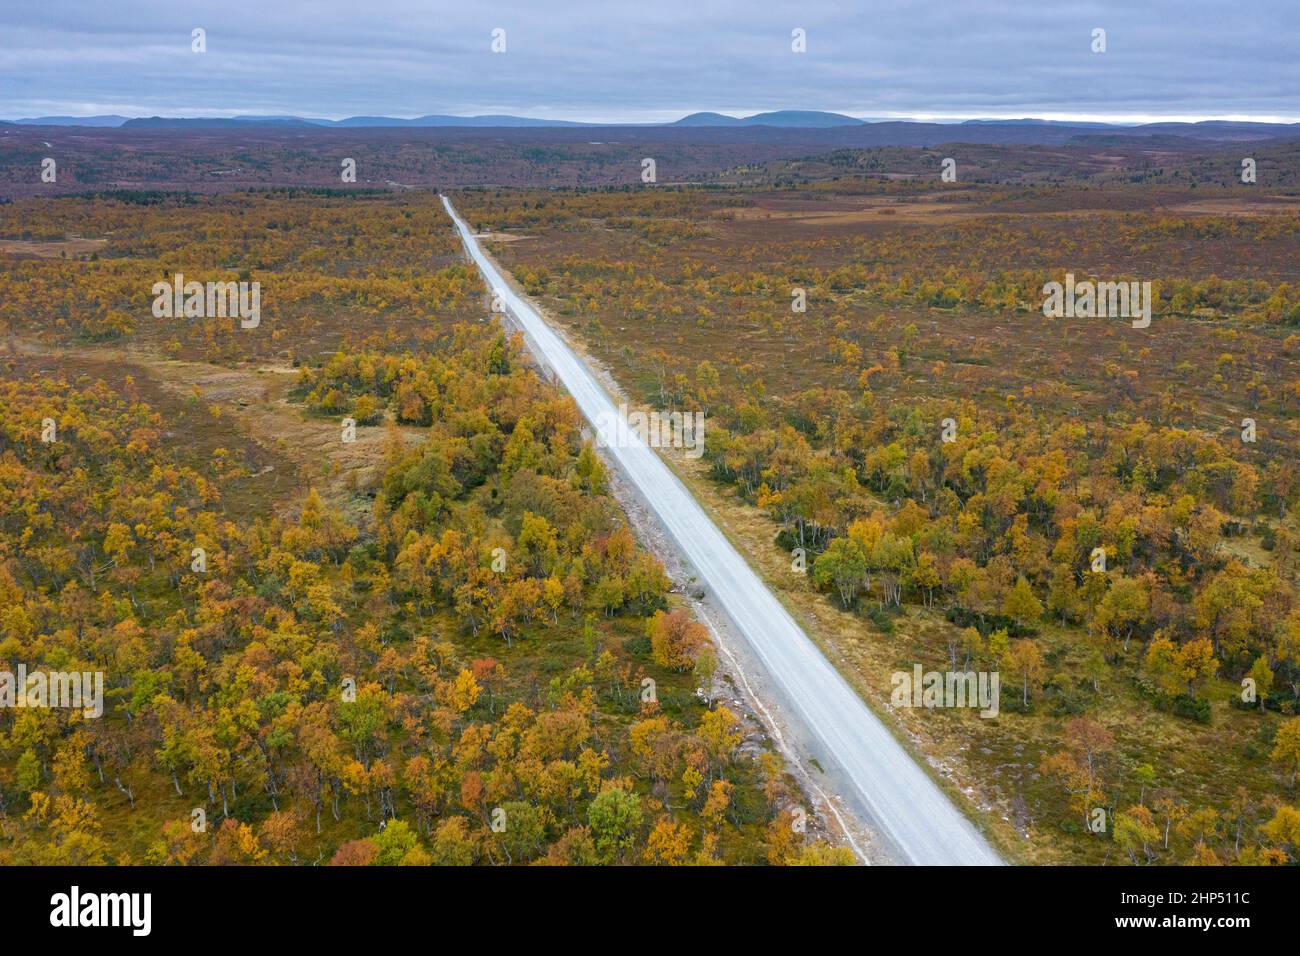 Aerial view over empty desolate road running through the taiga in autumn / fall, Härjedalen, Norrland, Sweden Stock Photo